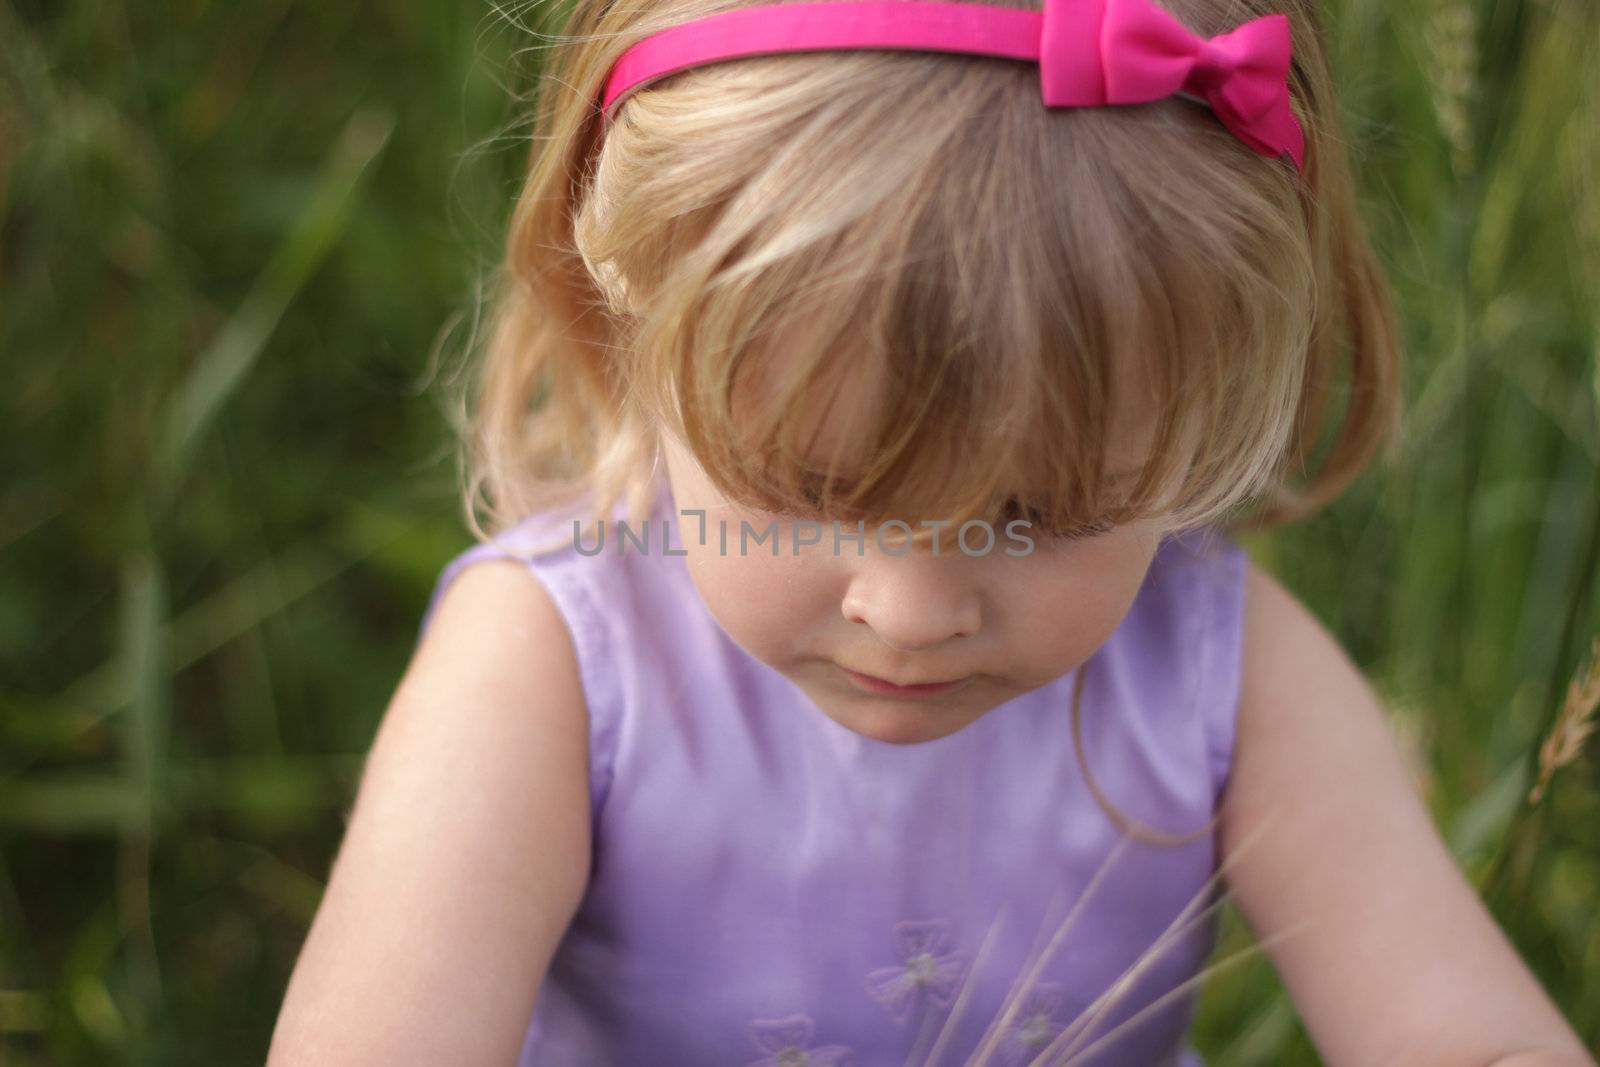 3 year old girl with blond hair and a bright pink hairband